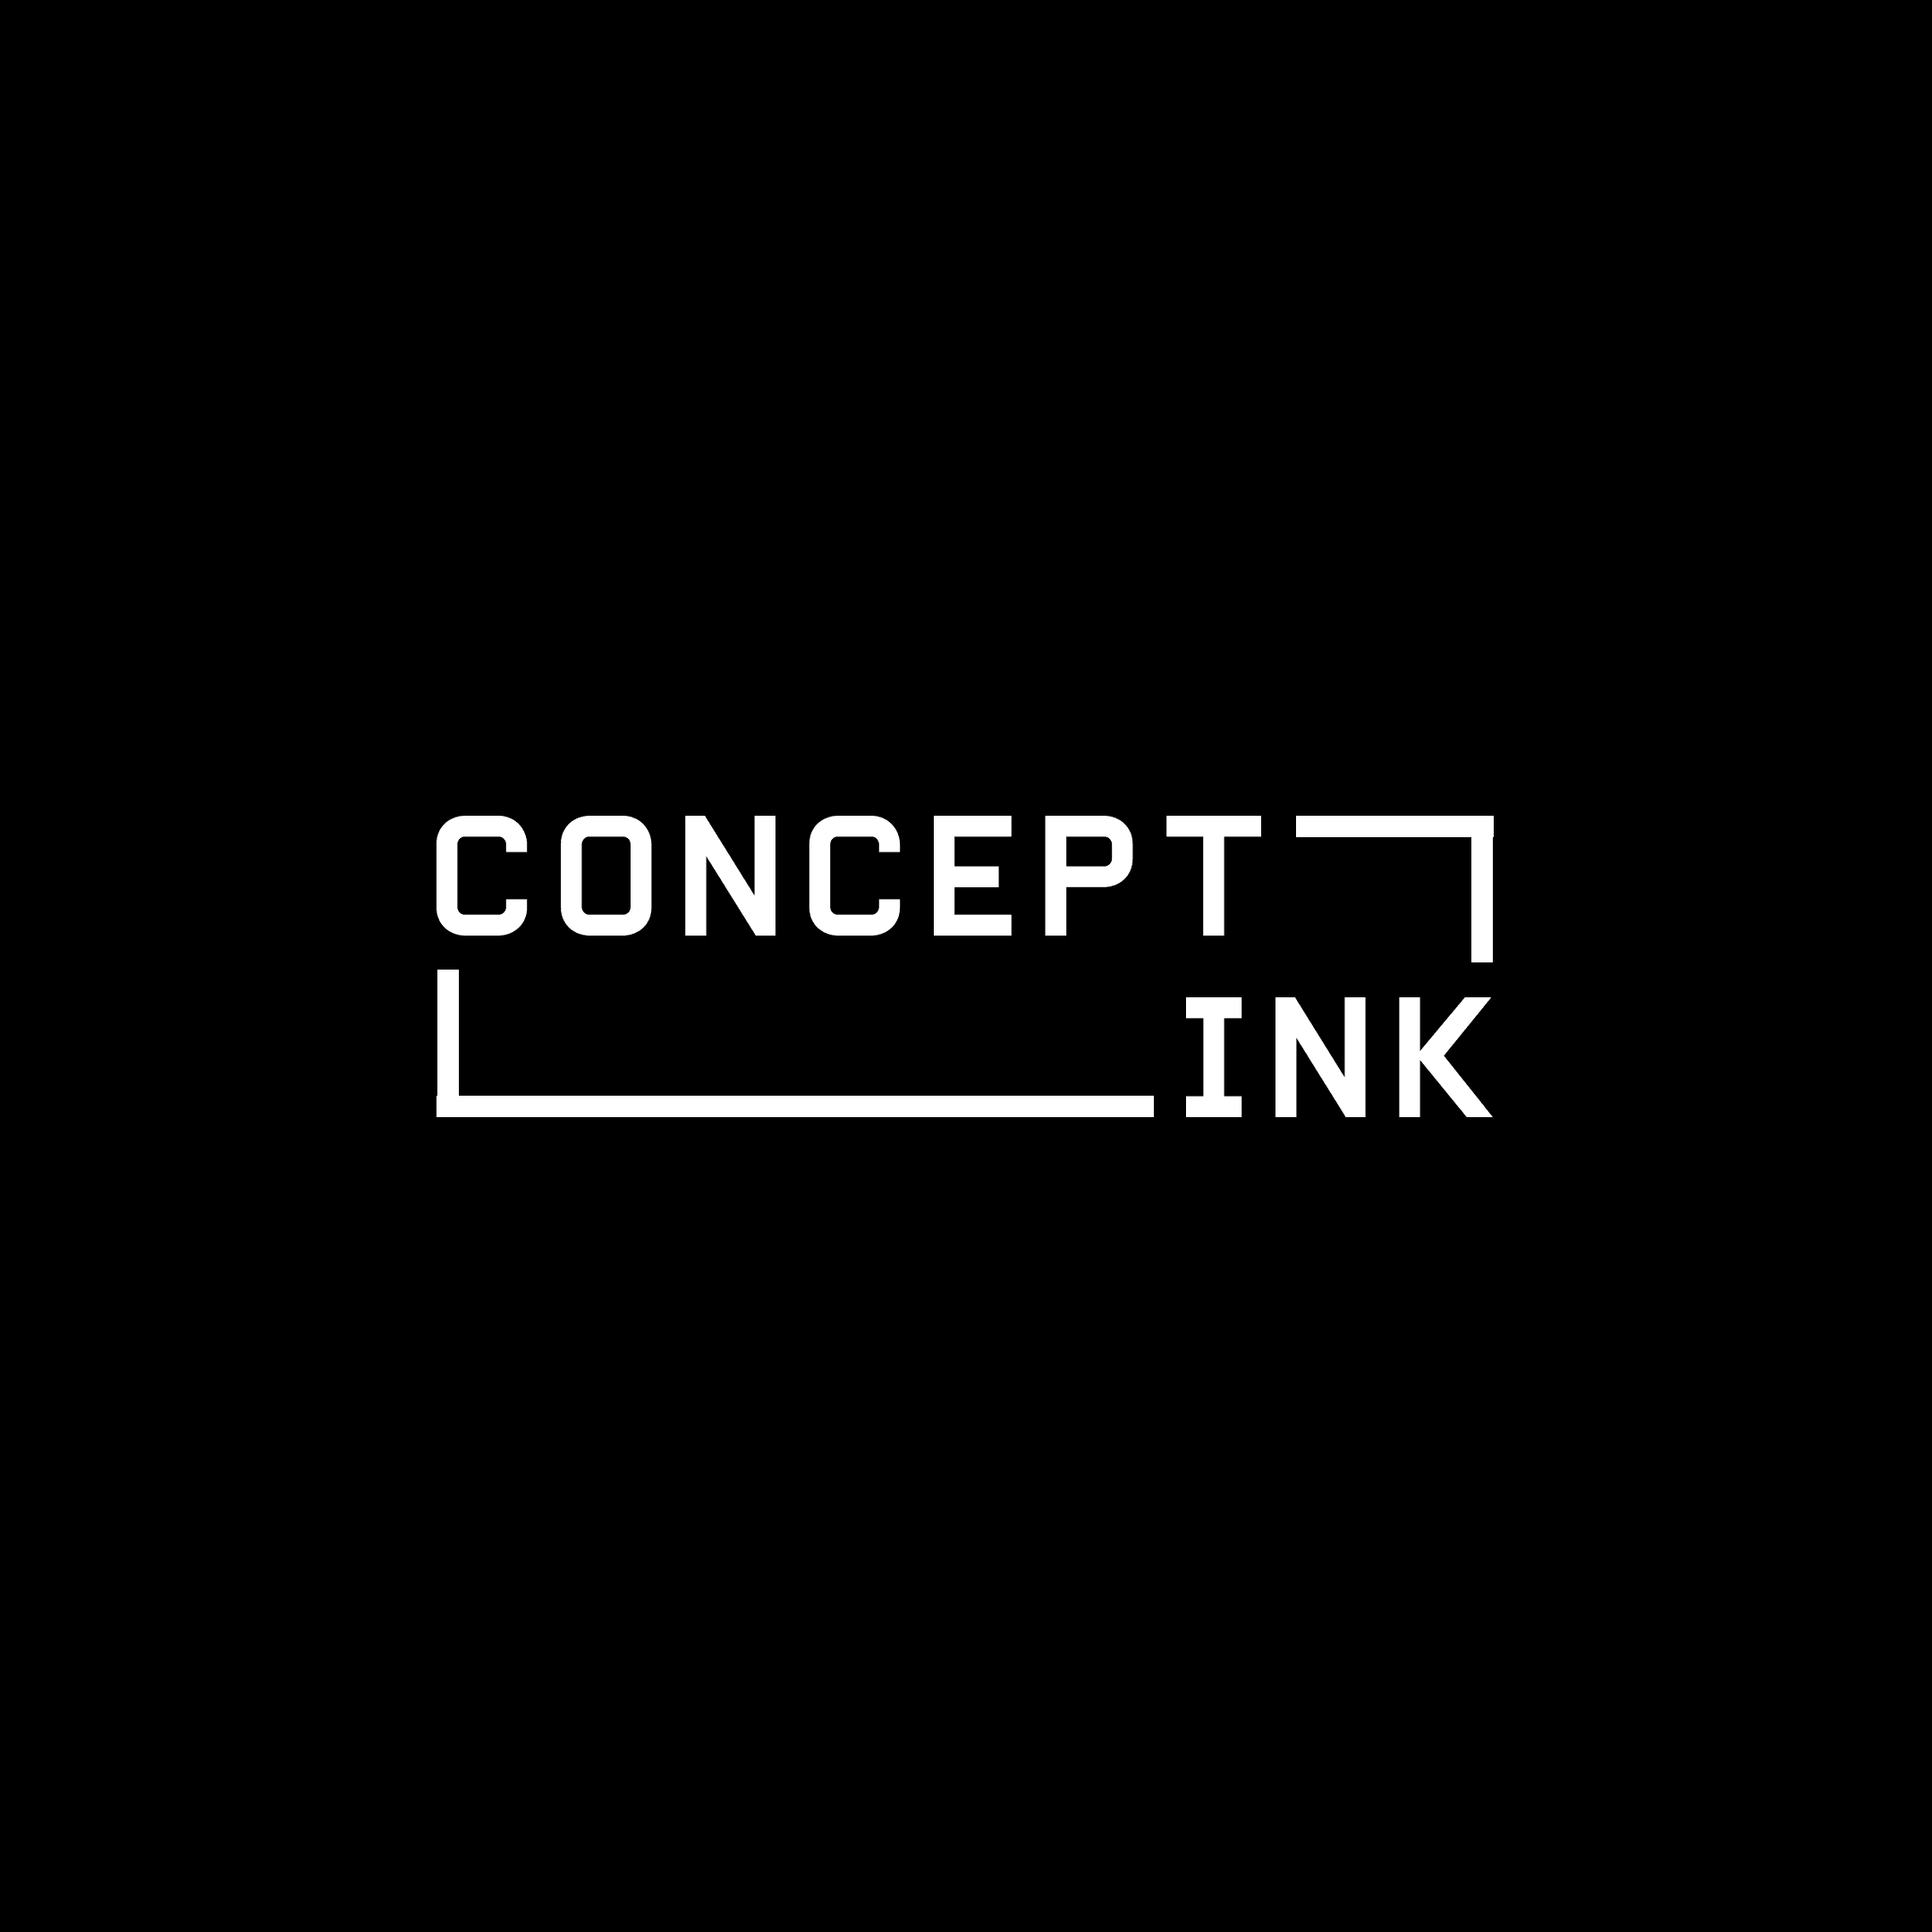 Concept Ink Logo by The Coopers